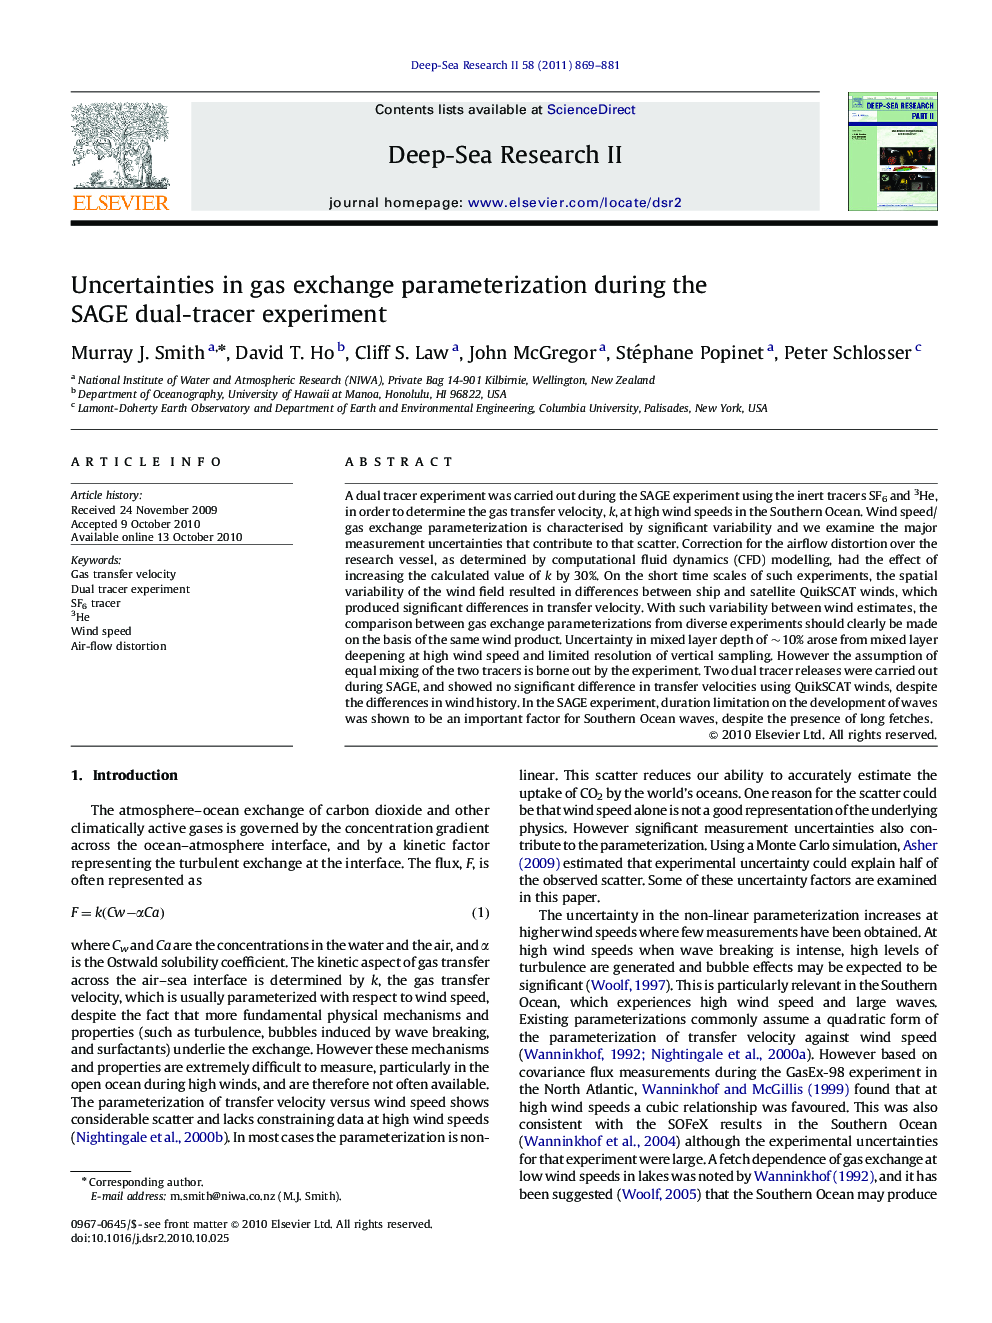 Uncertainties in gas exchange parameterization during the SAGE dual-tracer experiment